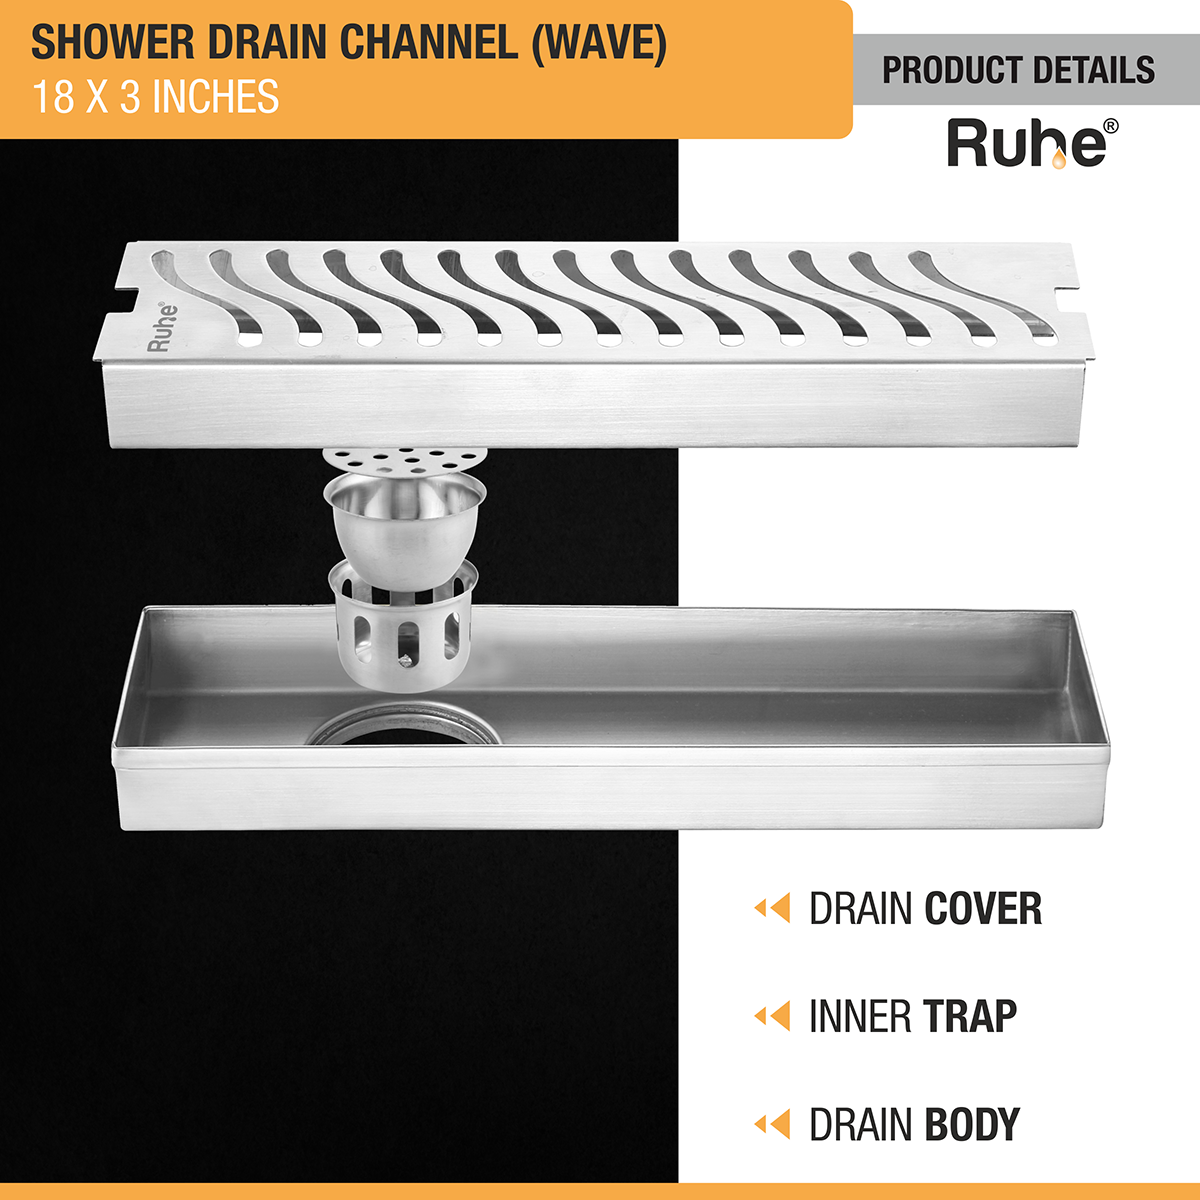 Wave Shower Drain Channel (18 X 3 Inches) with Cockroach Trap (304 Grade) product details